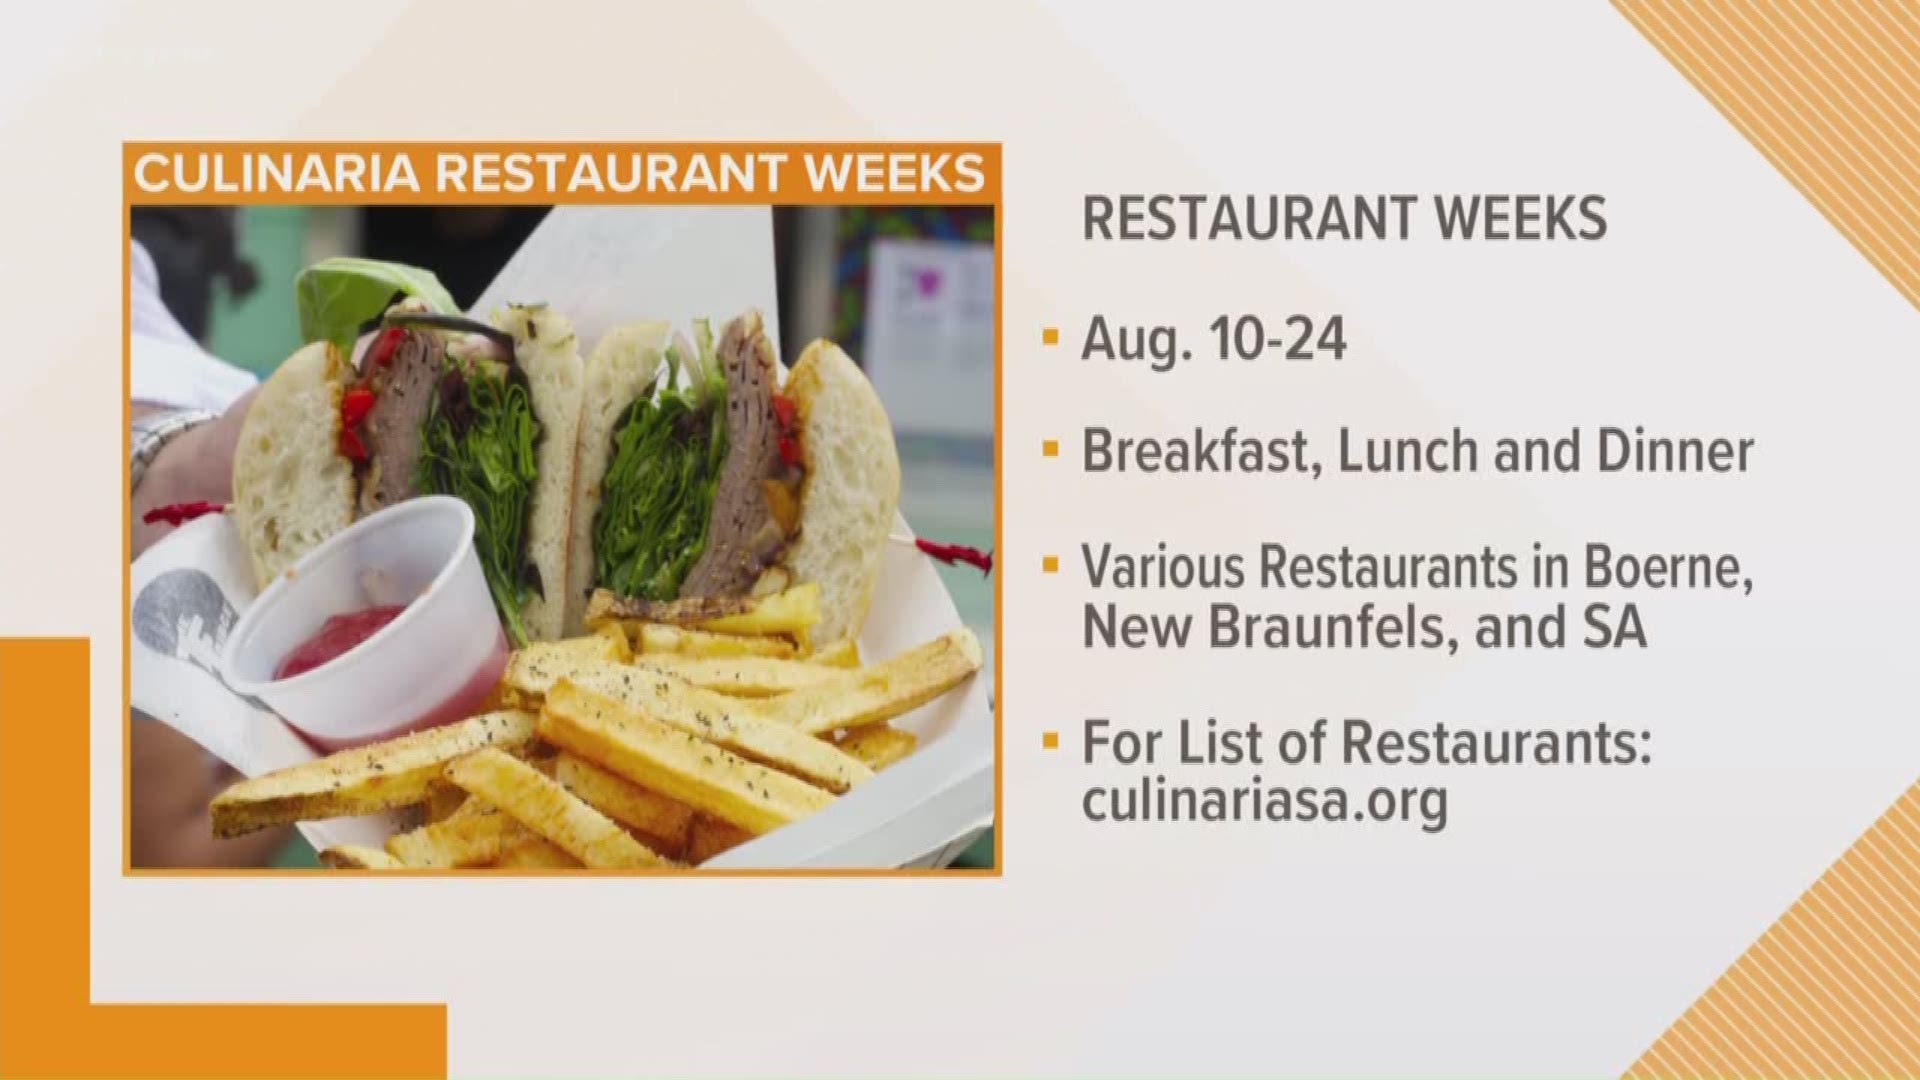 Culinaria is hosting another restaurant week where you can get a taste of some of the best restaurants around town for an affordable price.